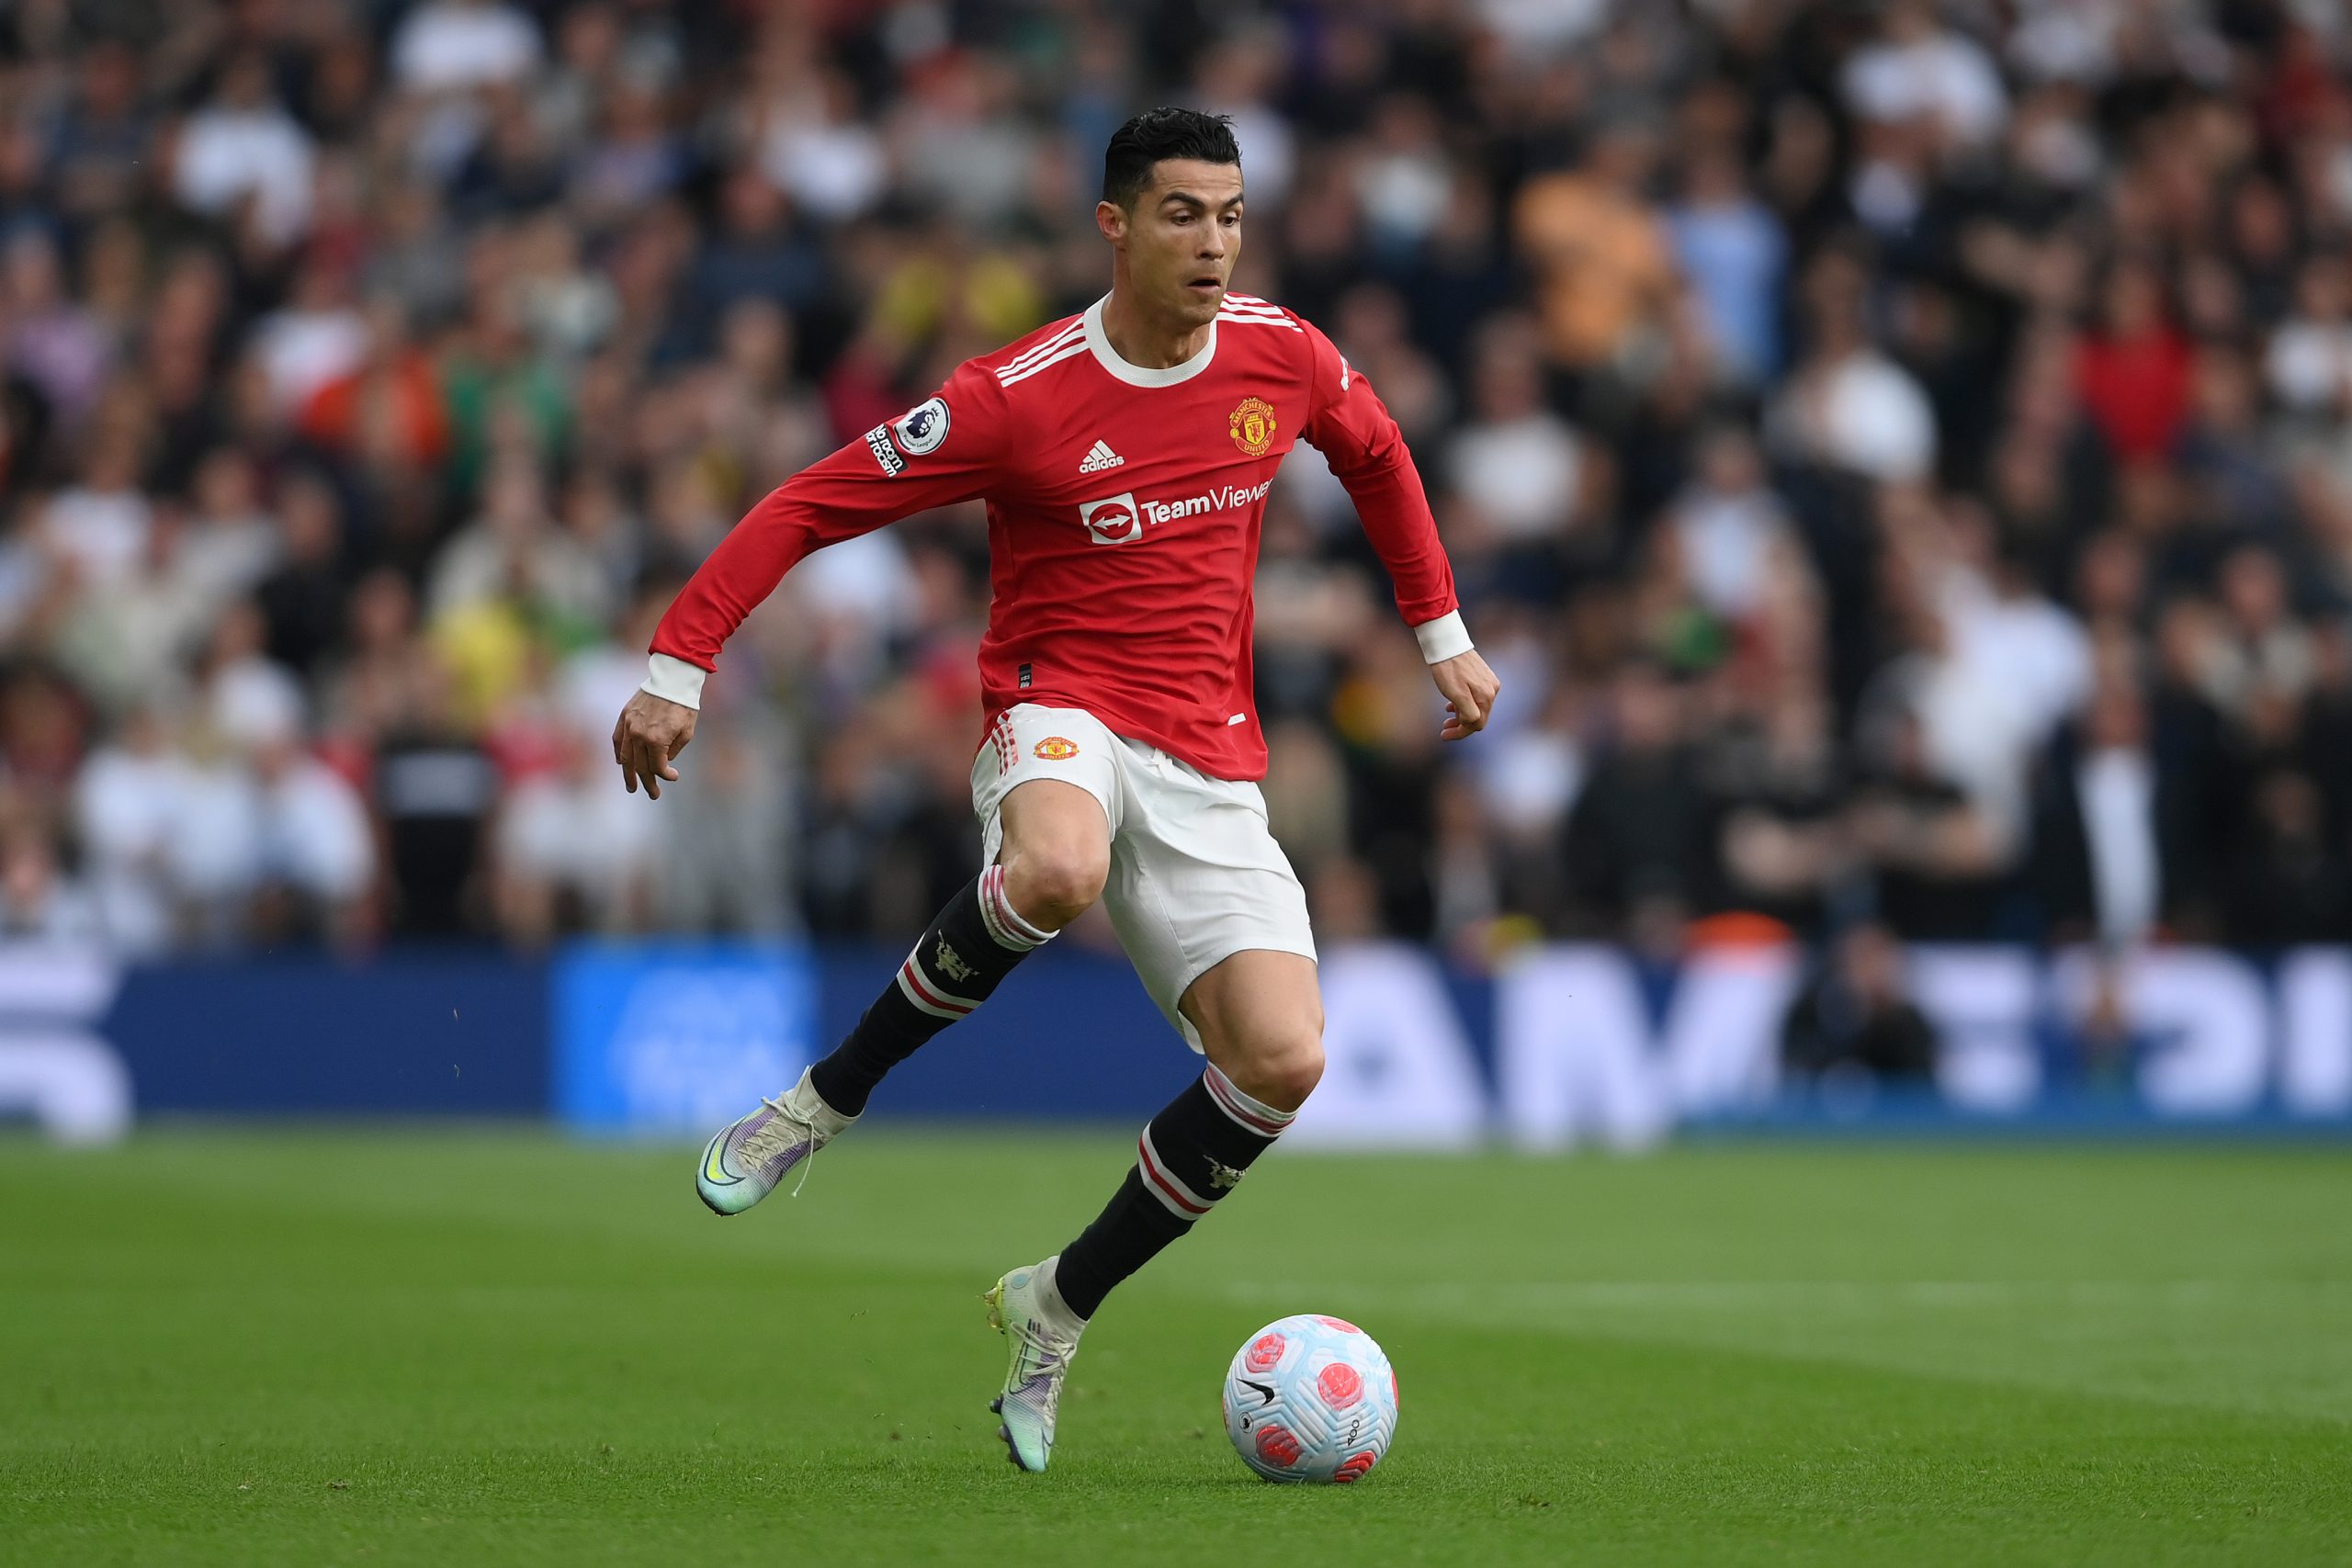 Big changes as Cristiano Ronaldo and new midfielder wizard all  start against Brentford